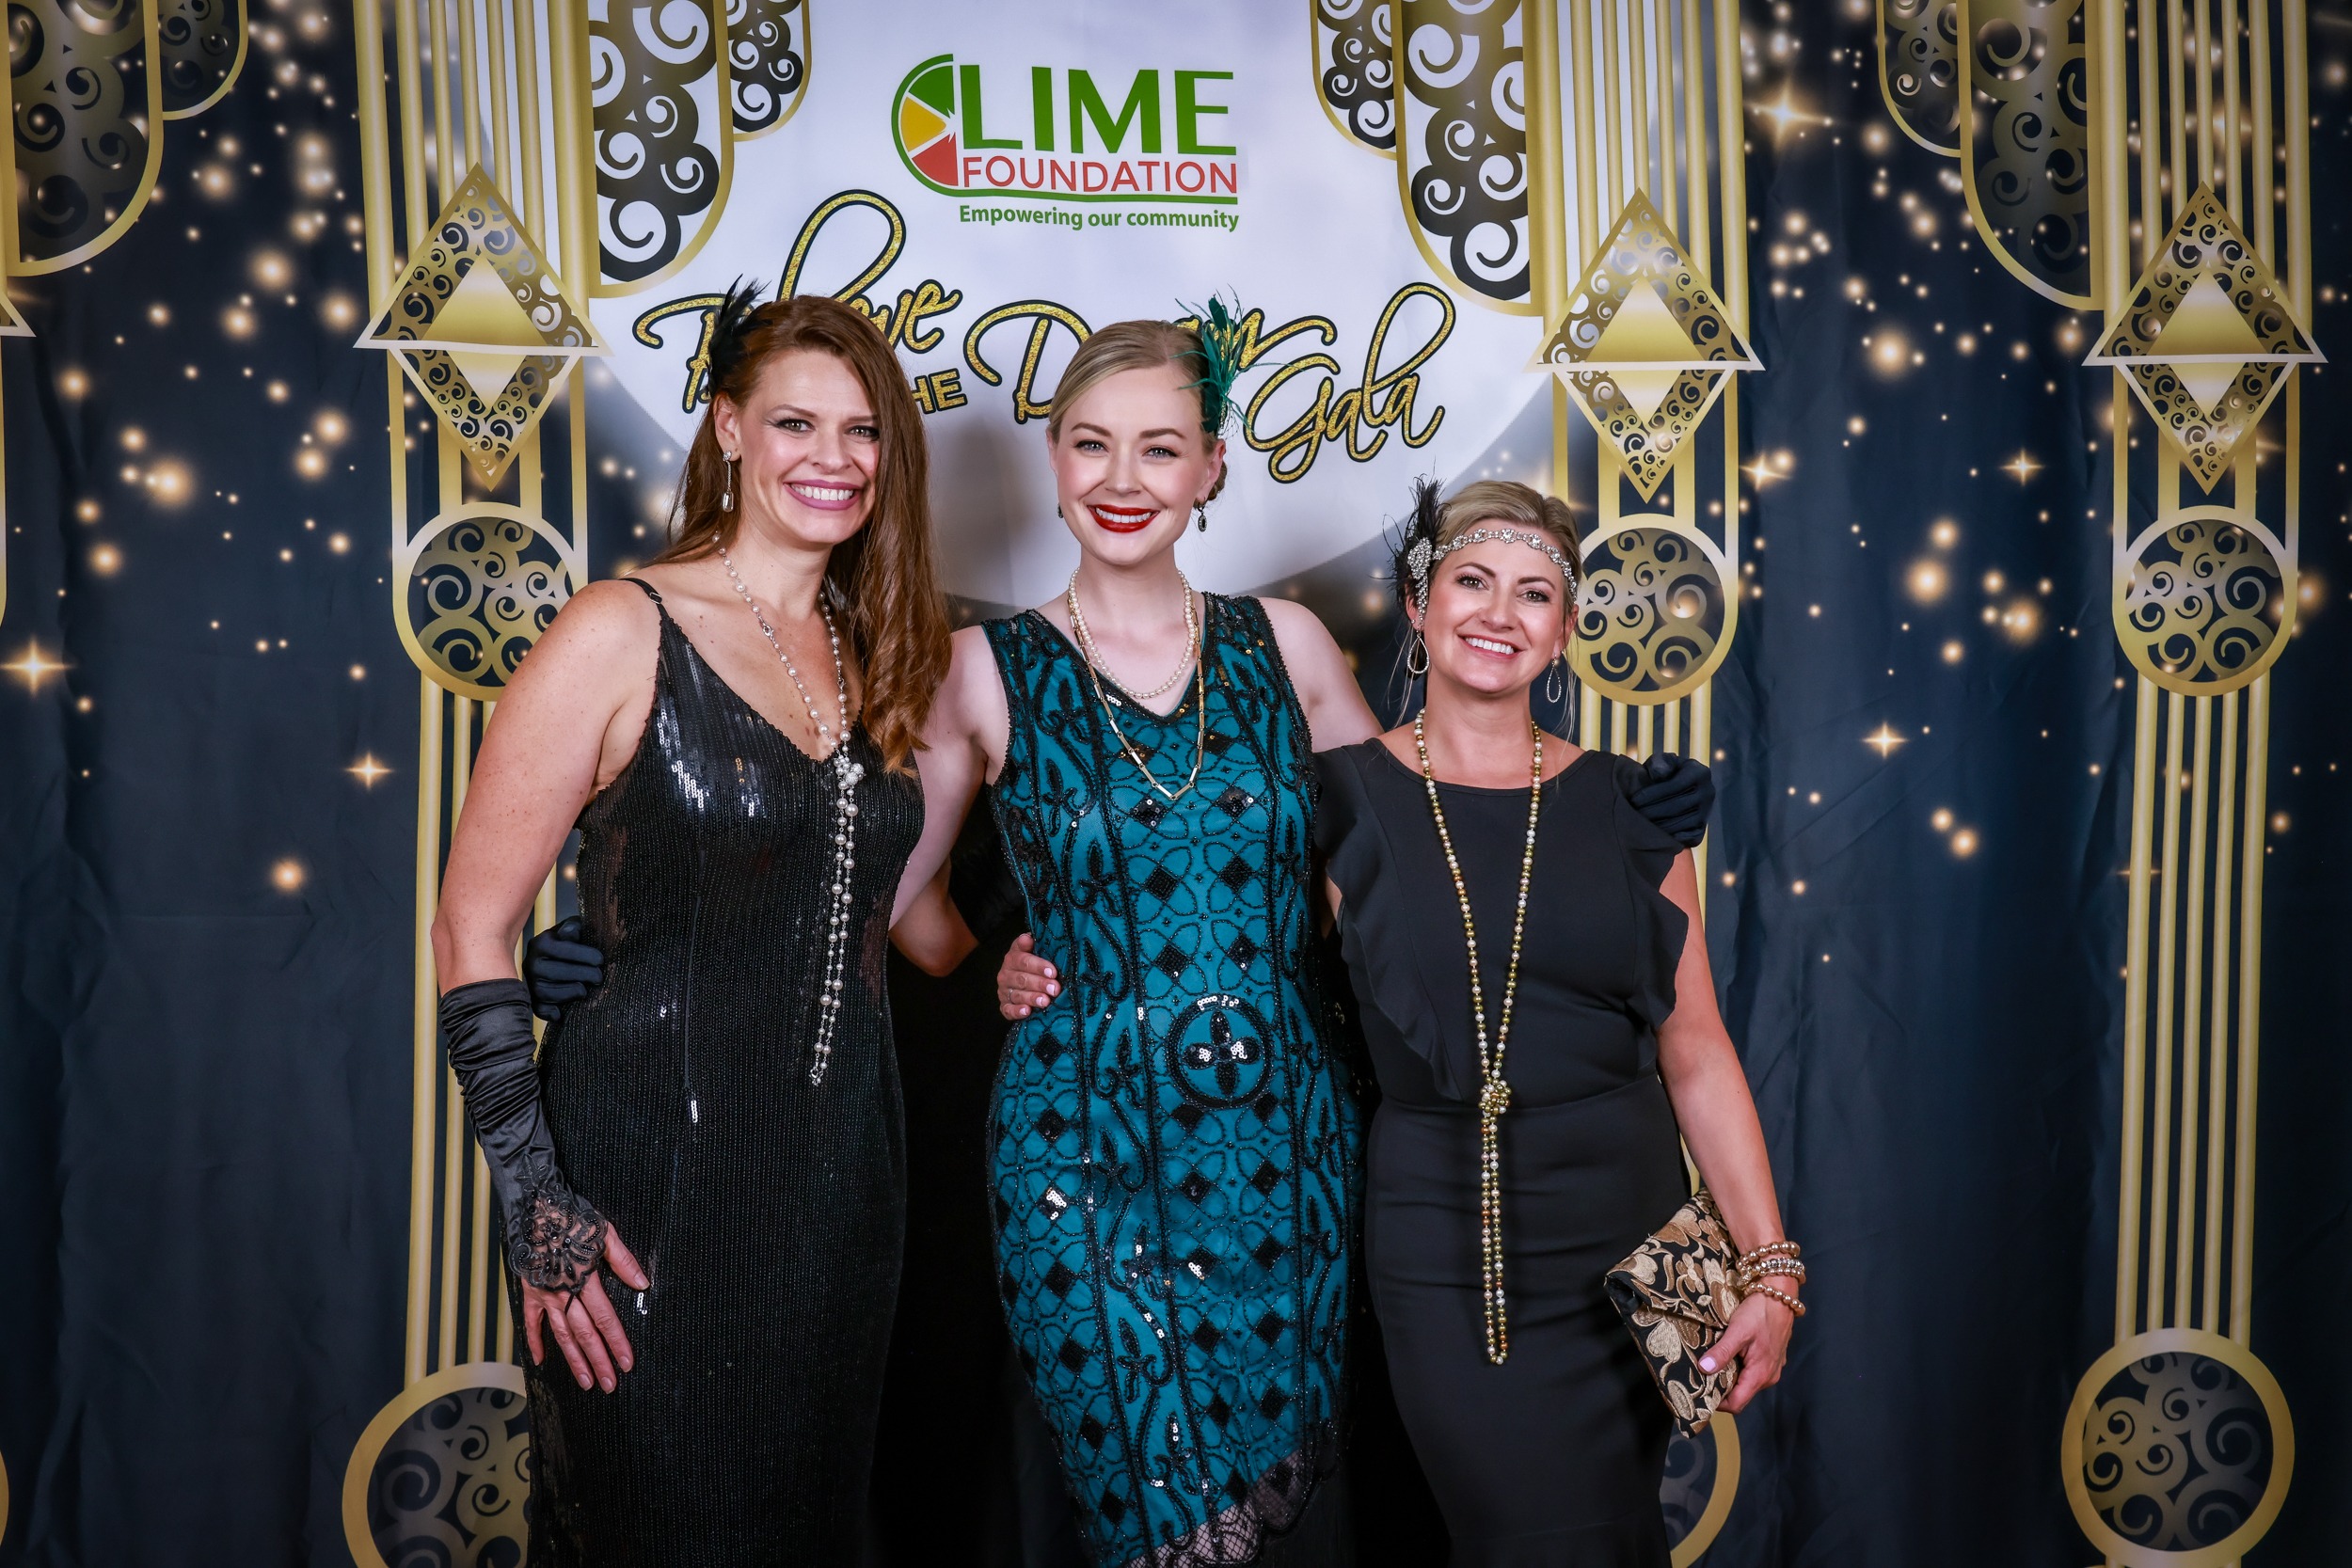 Three women posing for a photo at a LIME Foundation event.